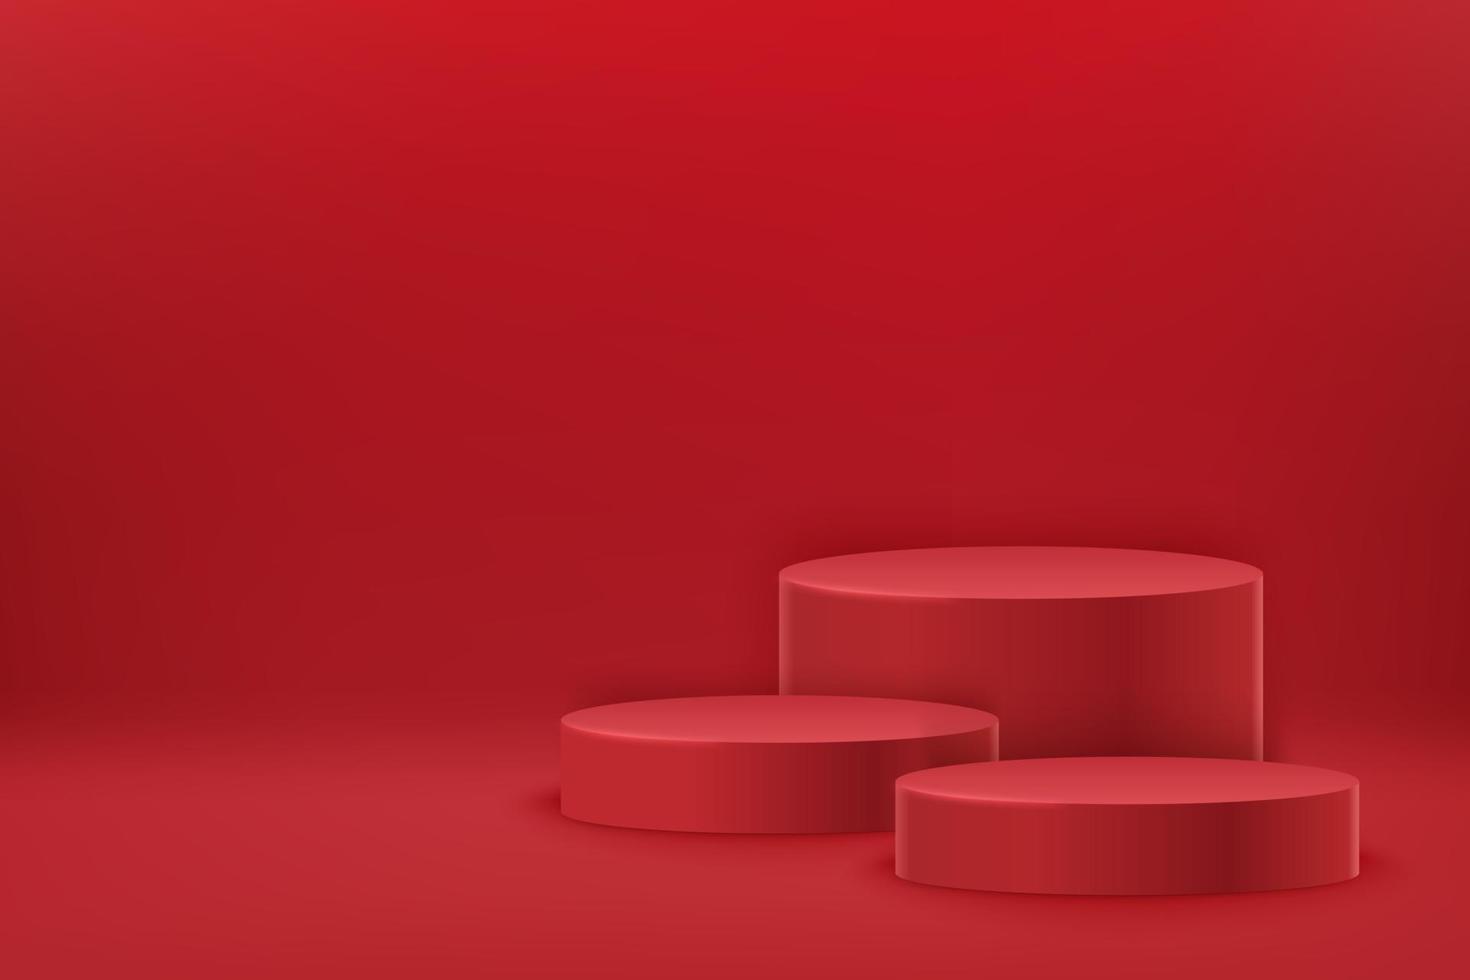 Tree empty red round podiums. Award ceremony concept. Abstract scene with cylindrical podiums. Geometry shape platform vector